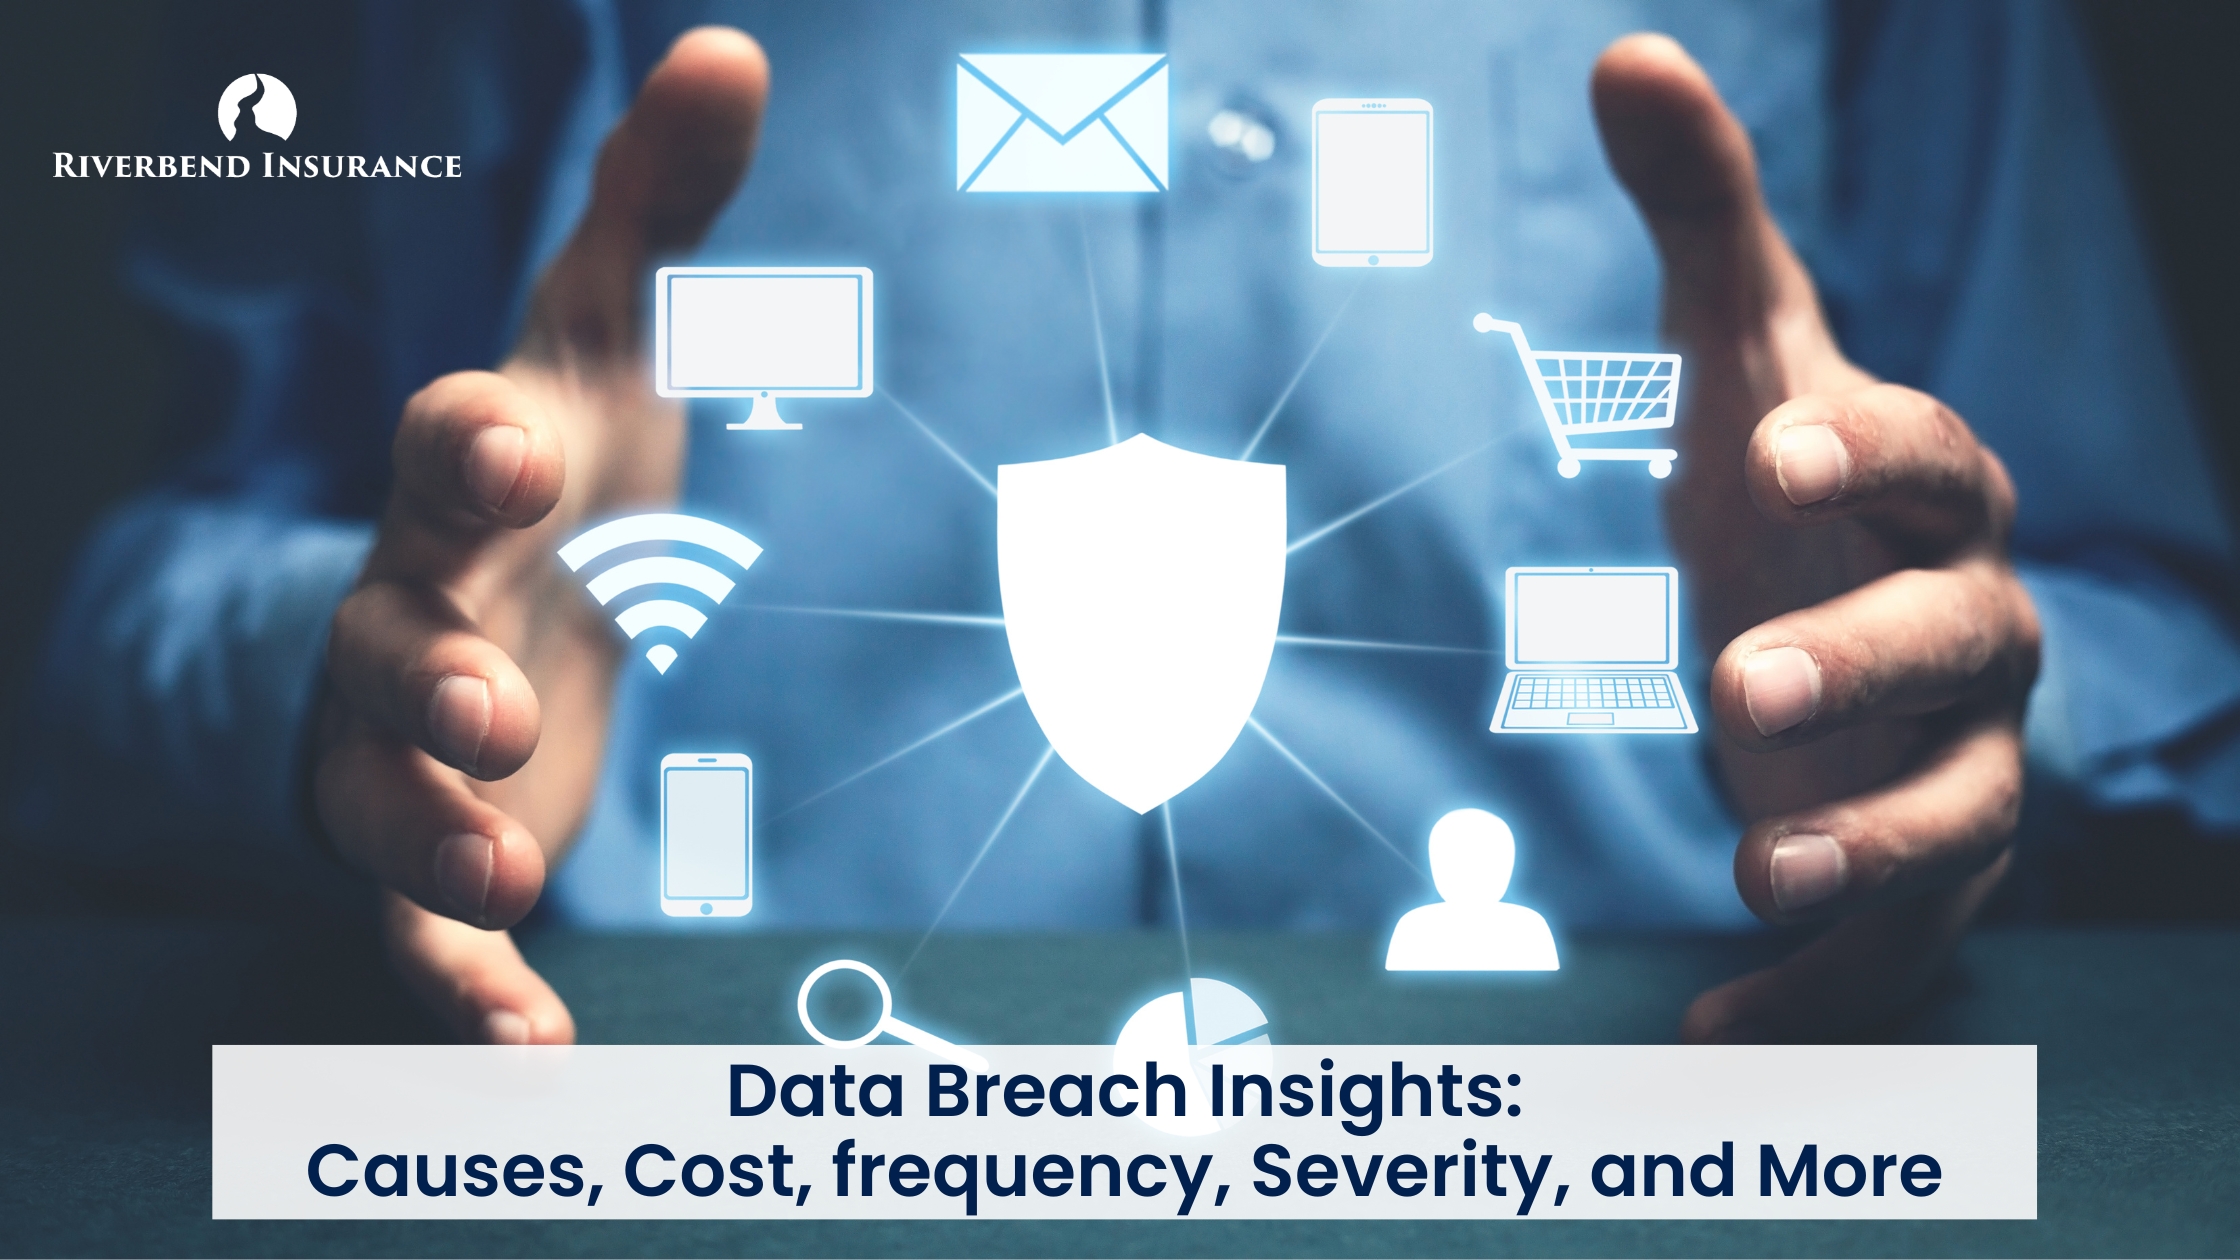 Data Breach Insights: Causes, Cost, frequency, Severity, and More